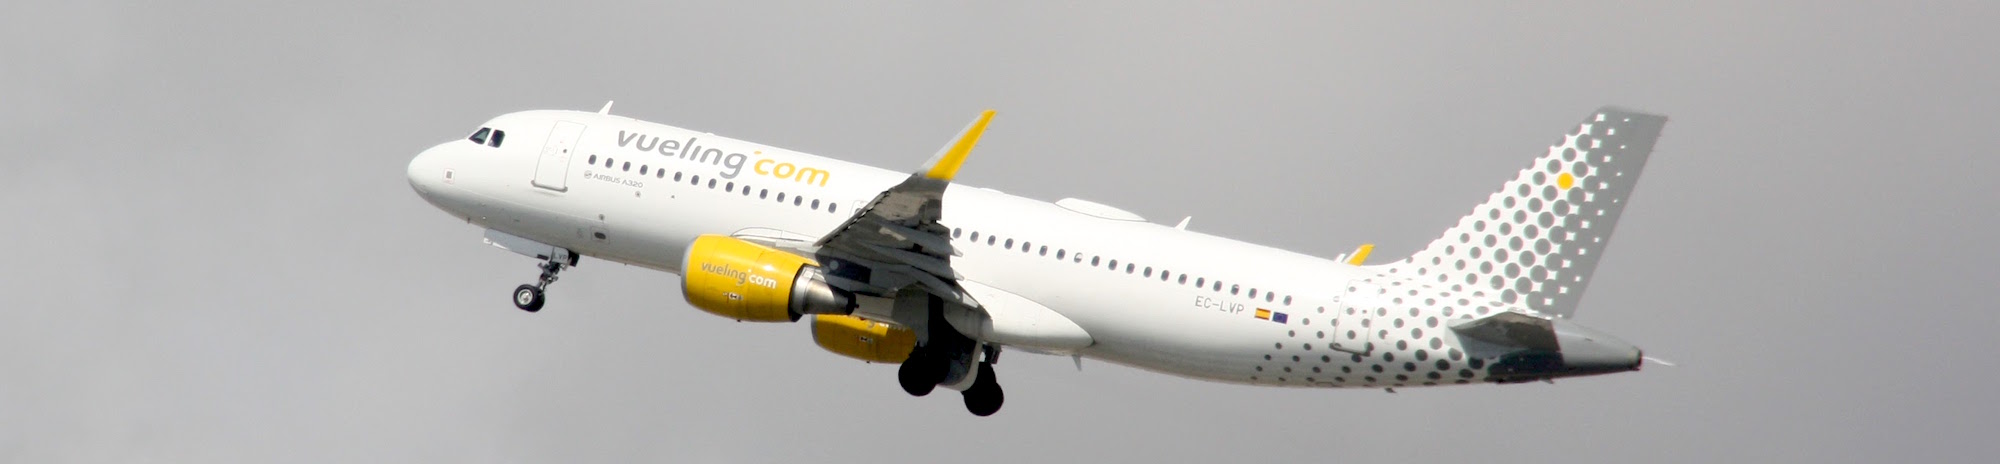 Best time to book flights for Barcelona (BCN) to Milano (MXP) flights with Vueling at AirHint